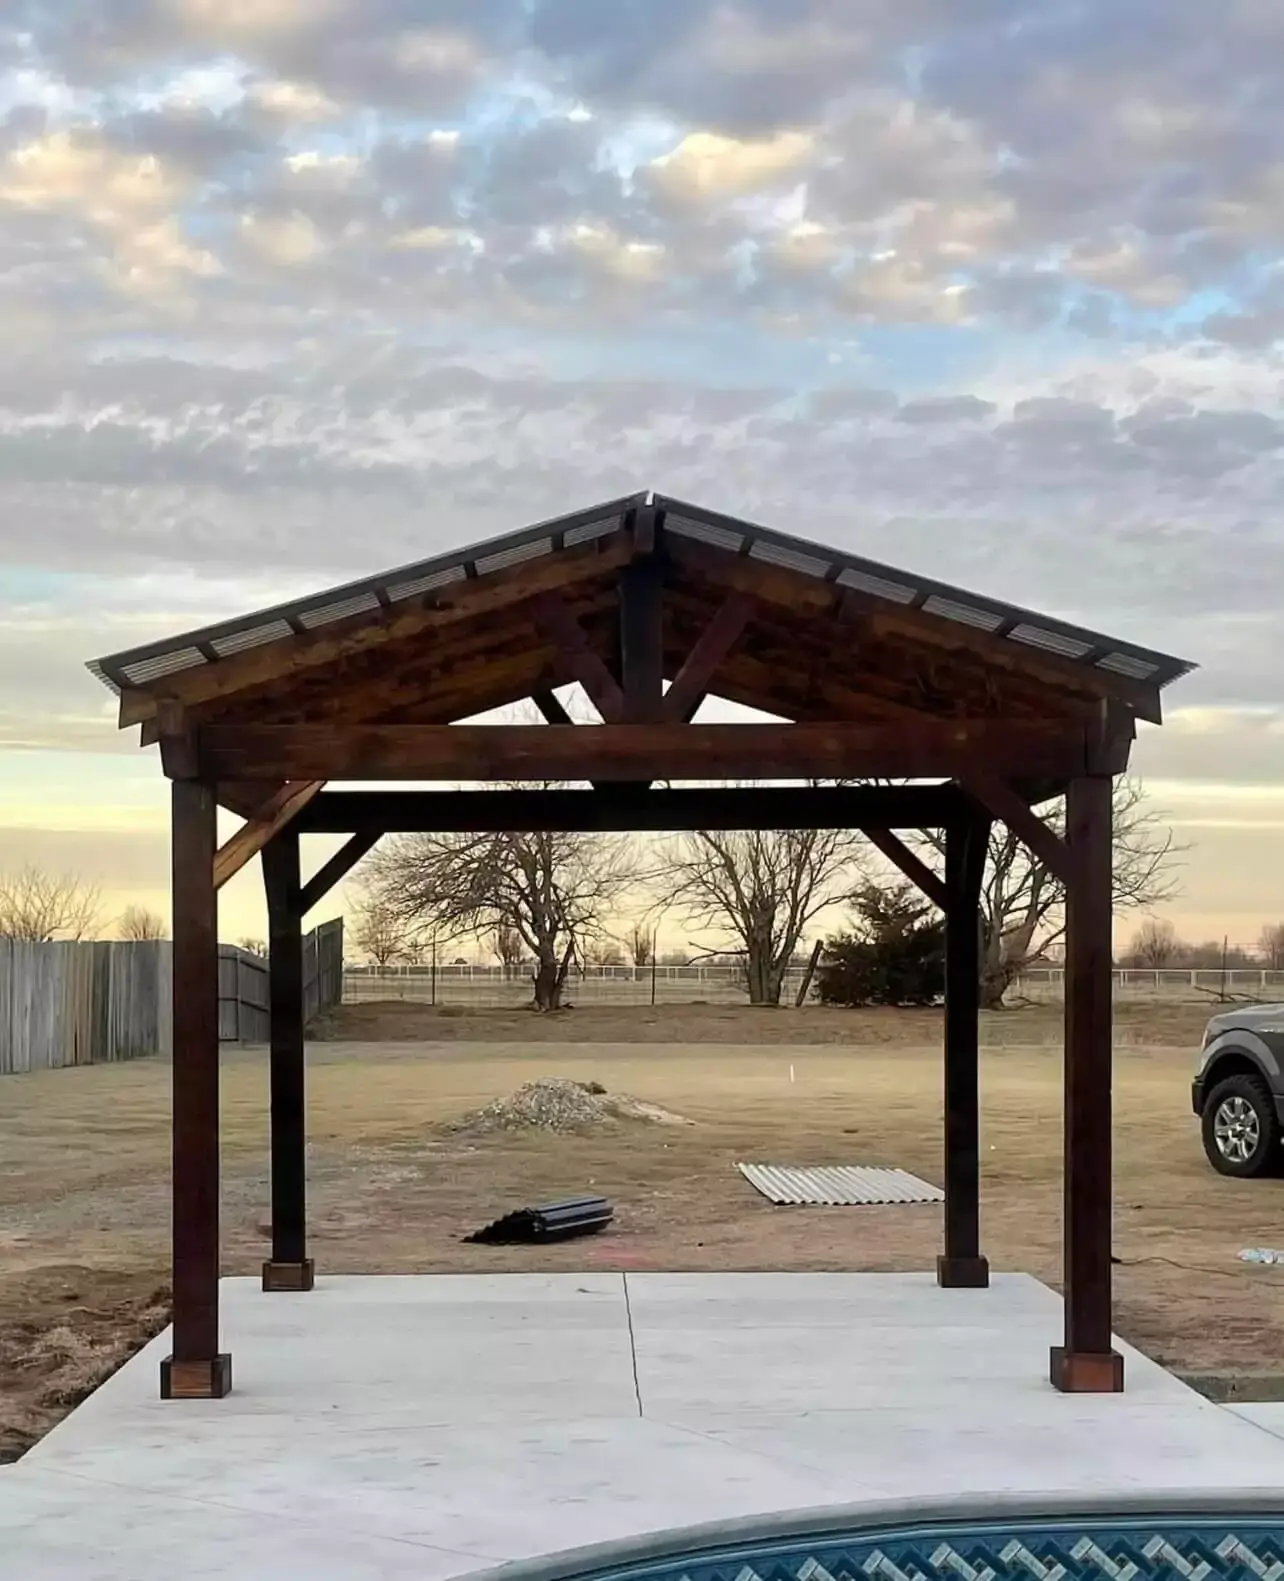 Wooden pergola on a concrete foundation in a large, open space.